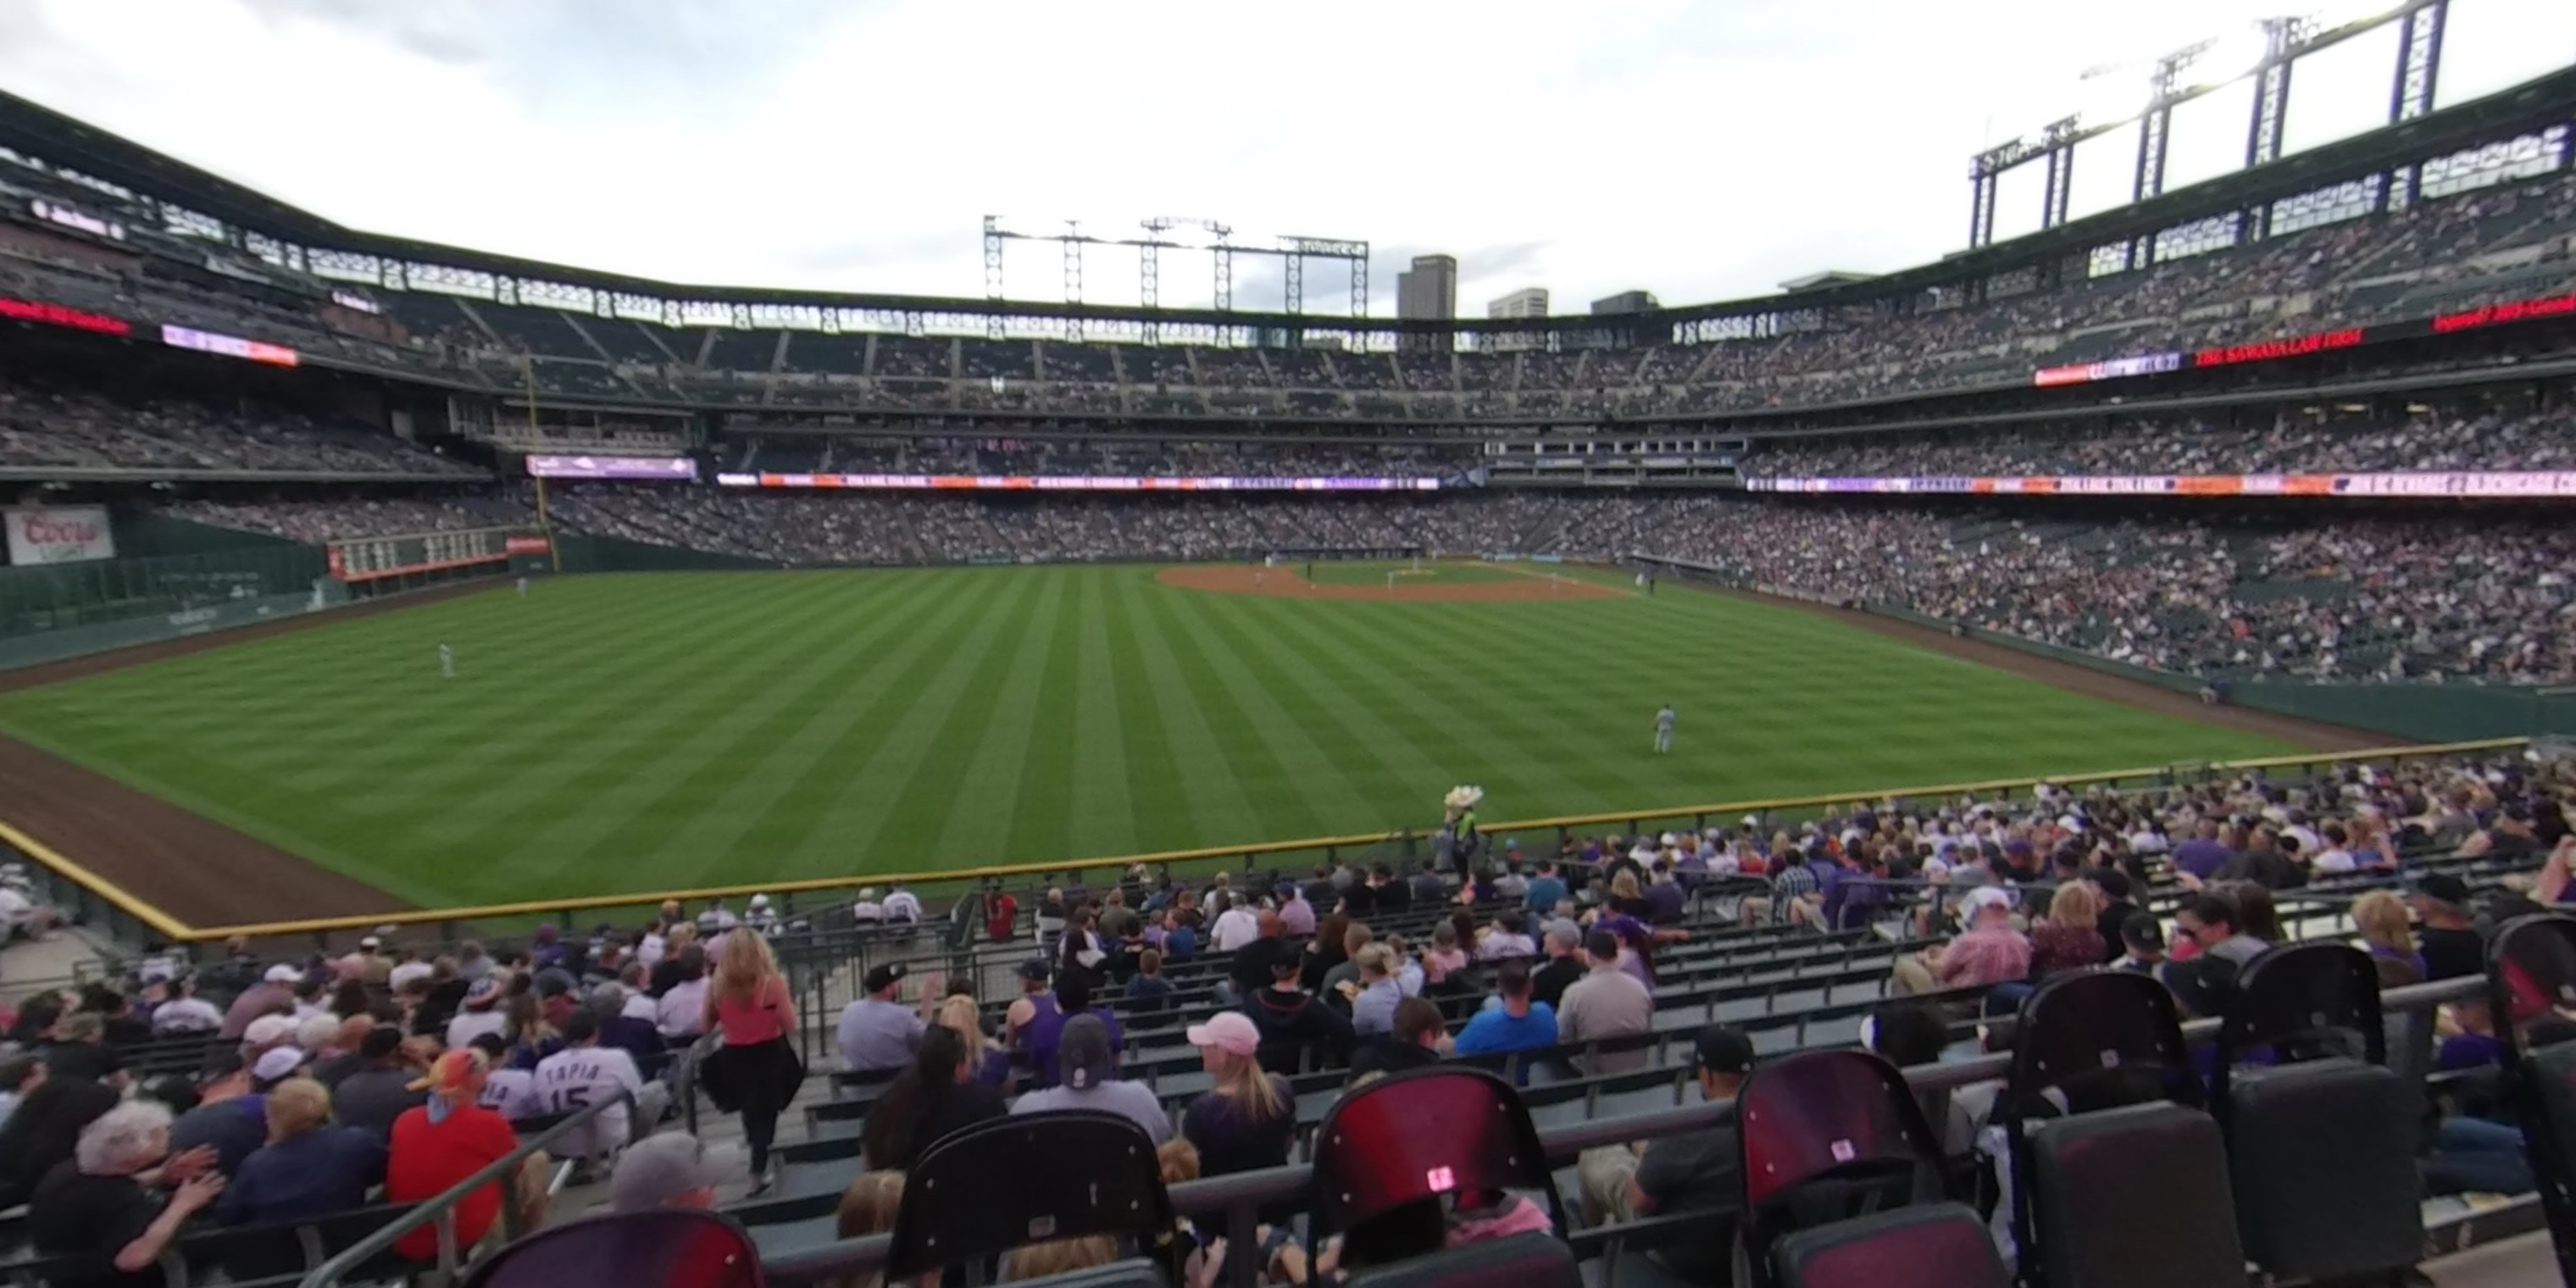 section 155 panoramic seat view  - coors field